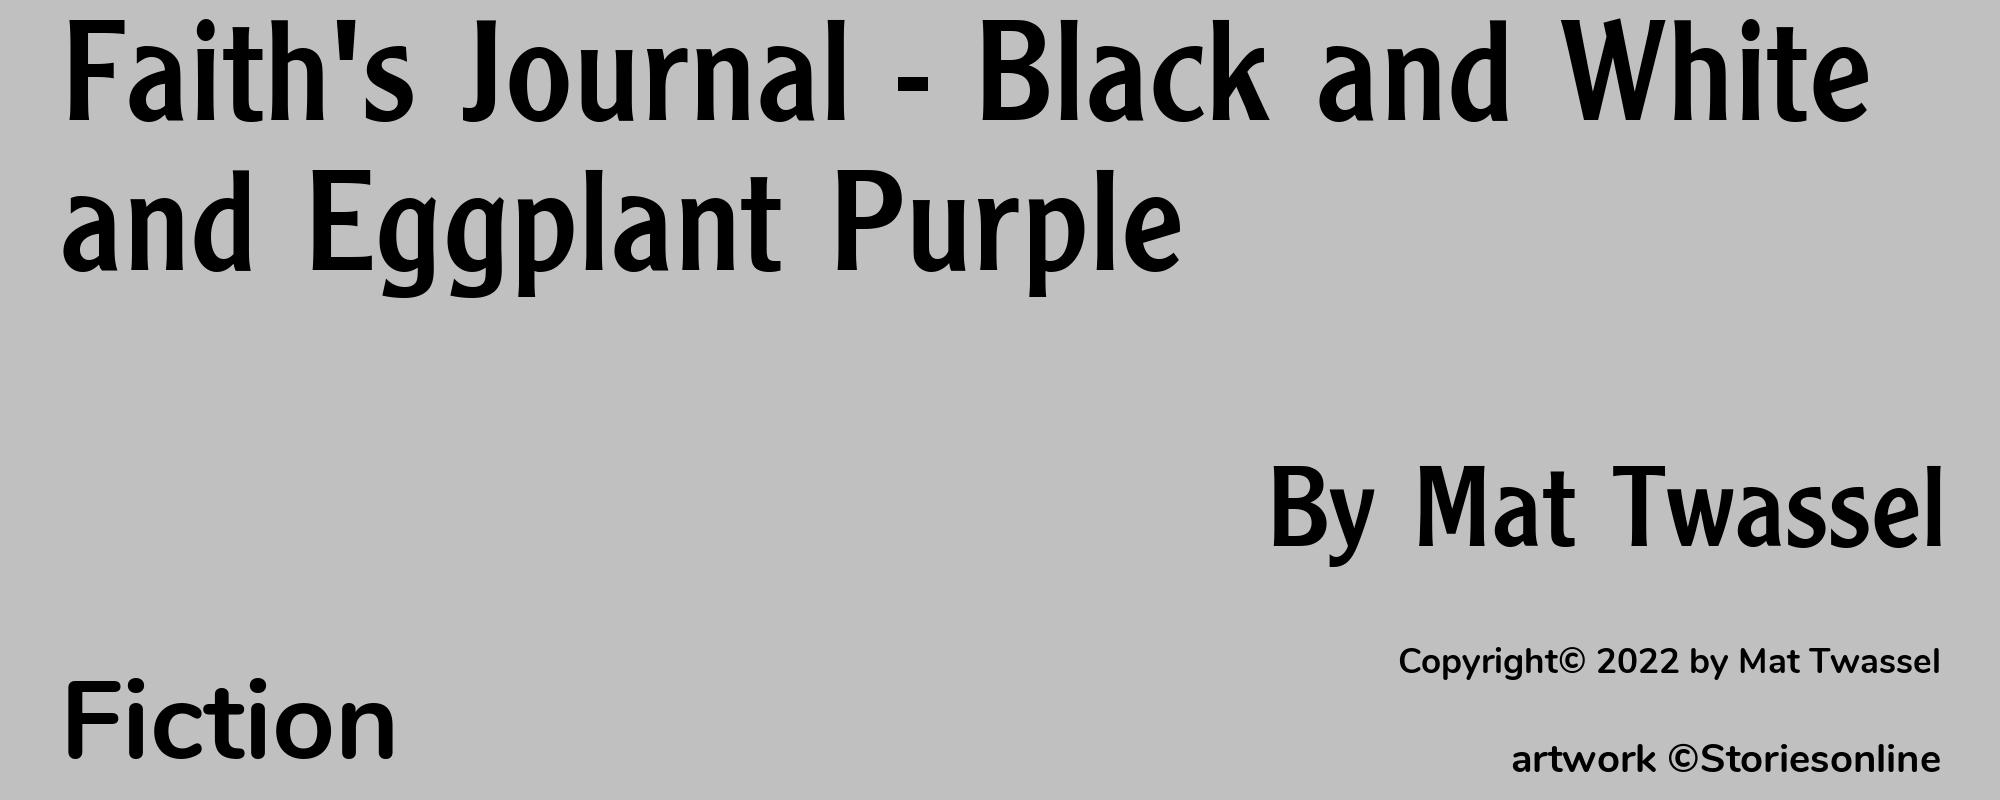 Faith's Journal - Black and White and Eggplant Purple - Cover